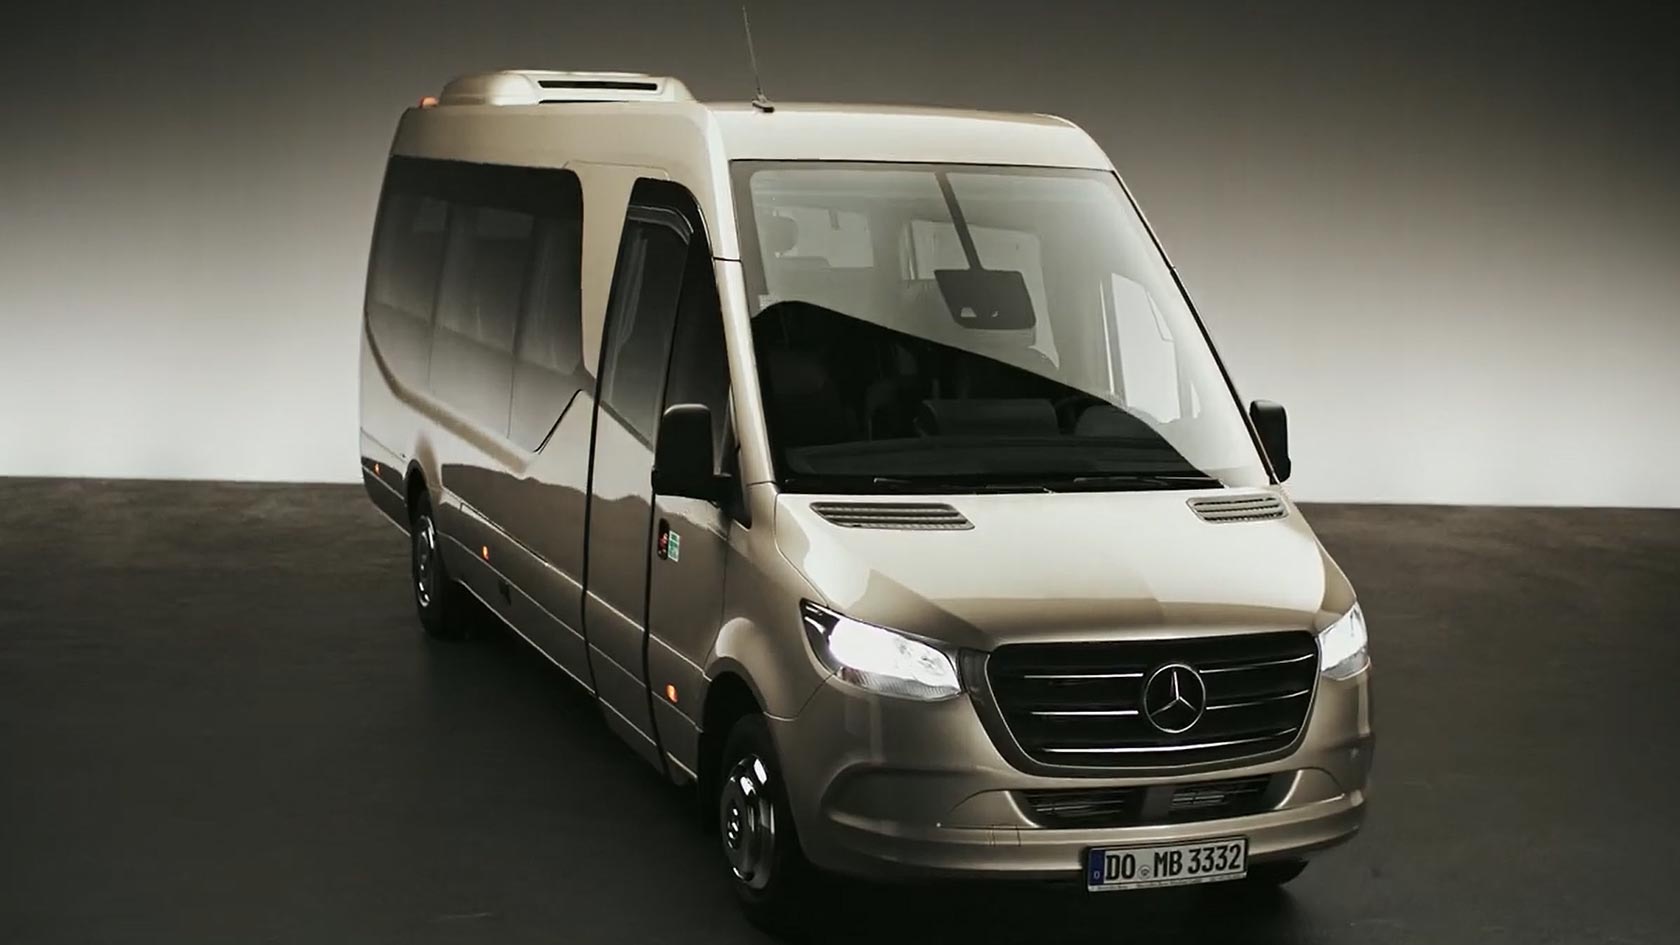 Top Considerations for Choosing a 16 Seater Minibus for Your Next UK Group Trip